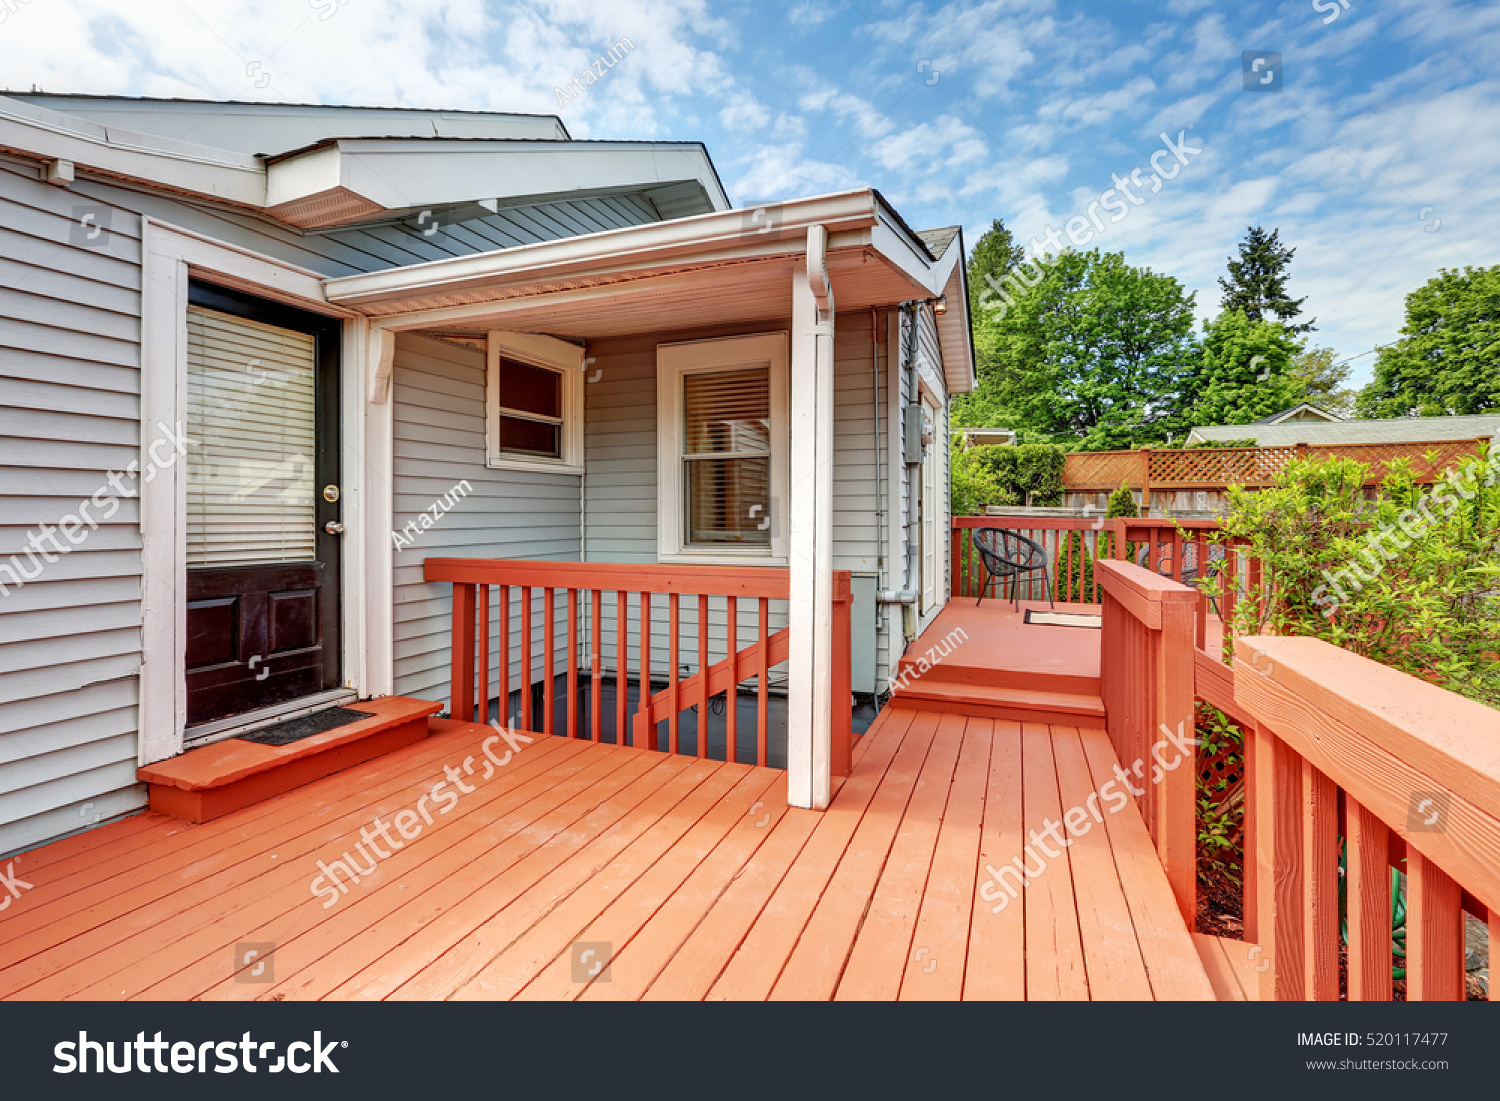 Backyard of craftsman home with red deck. Northwest, USA  #520117477